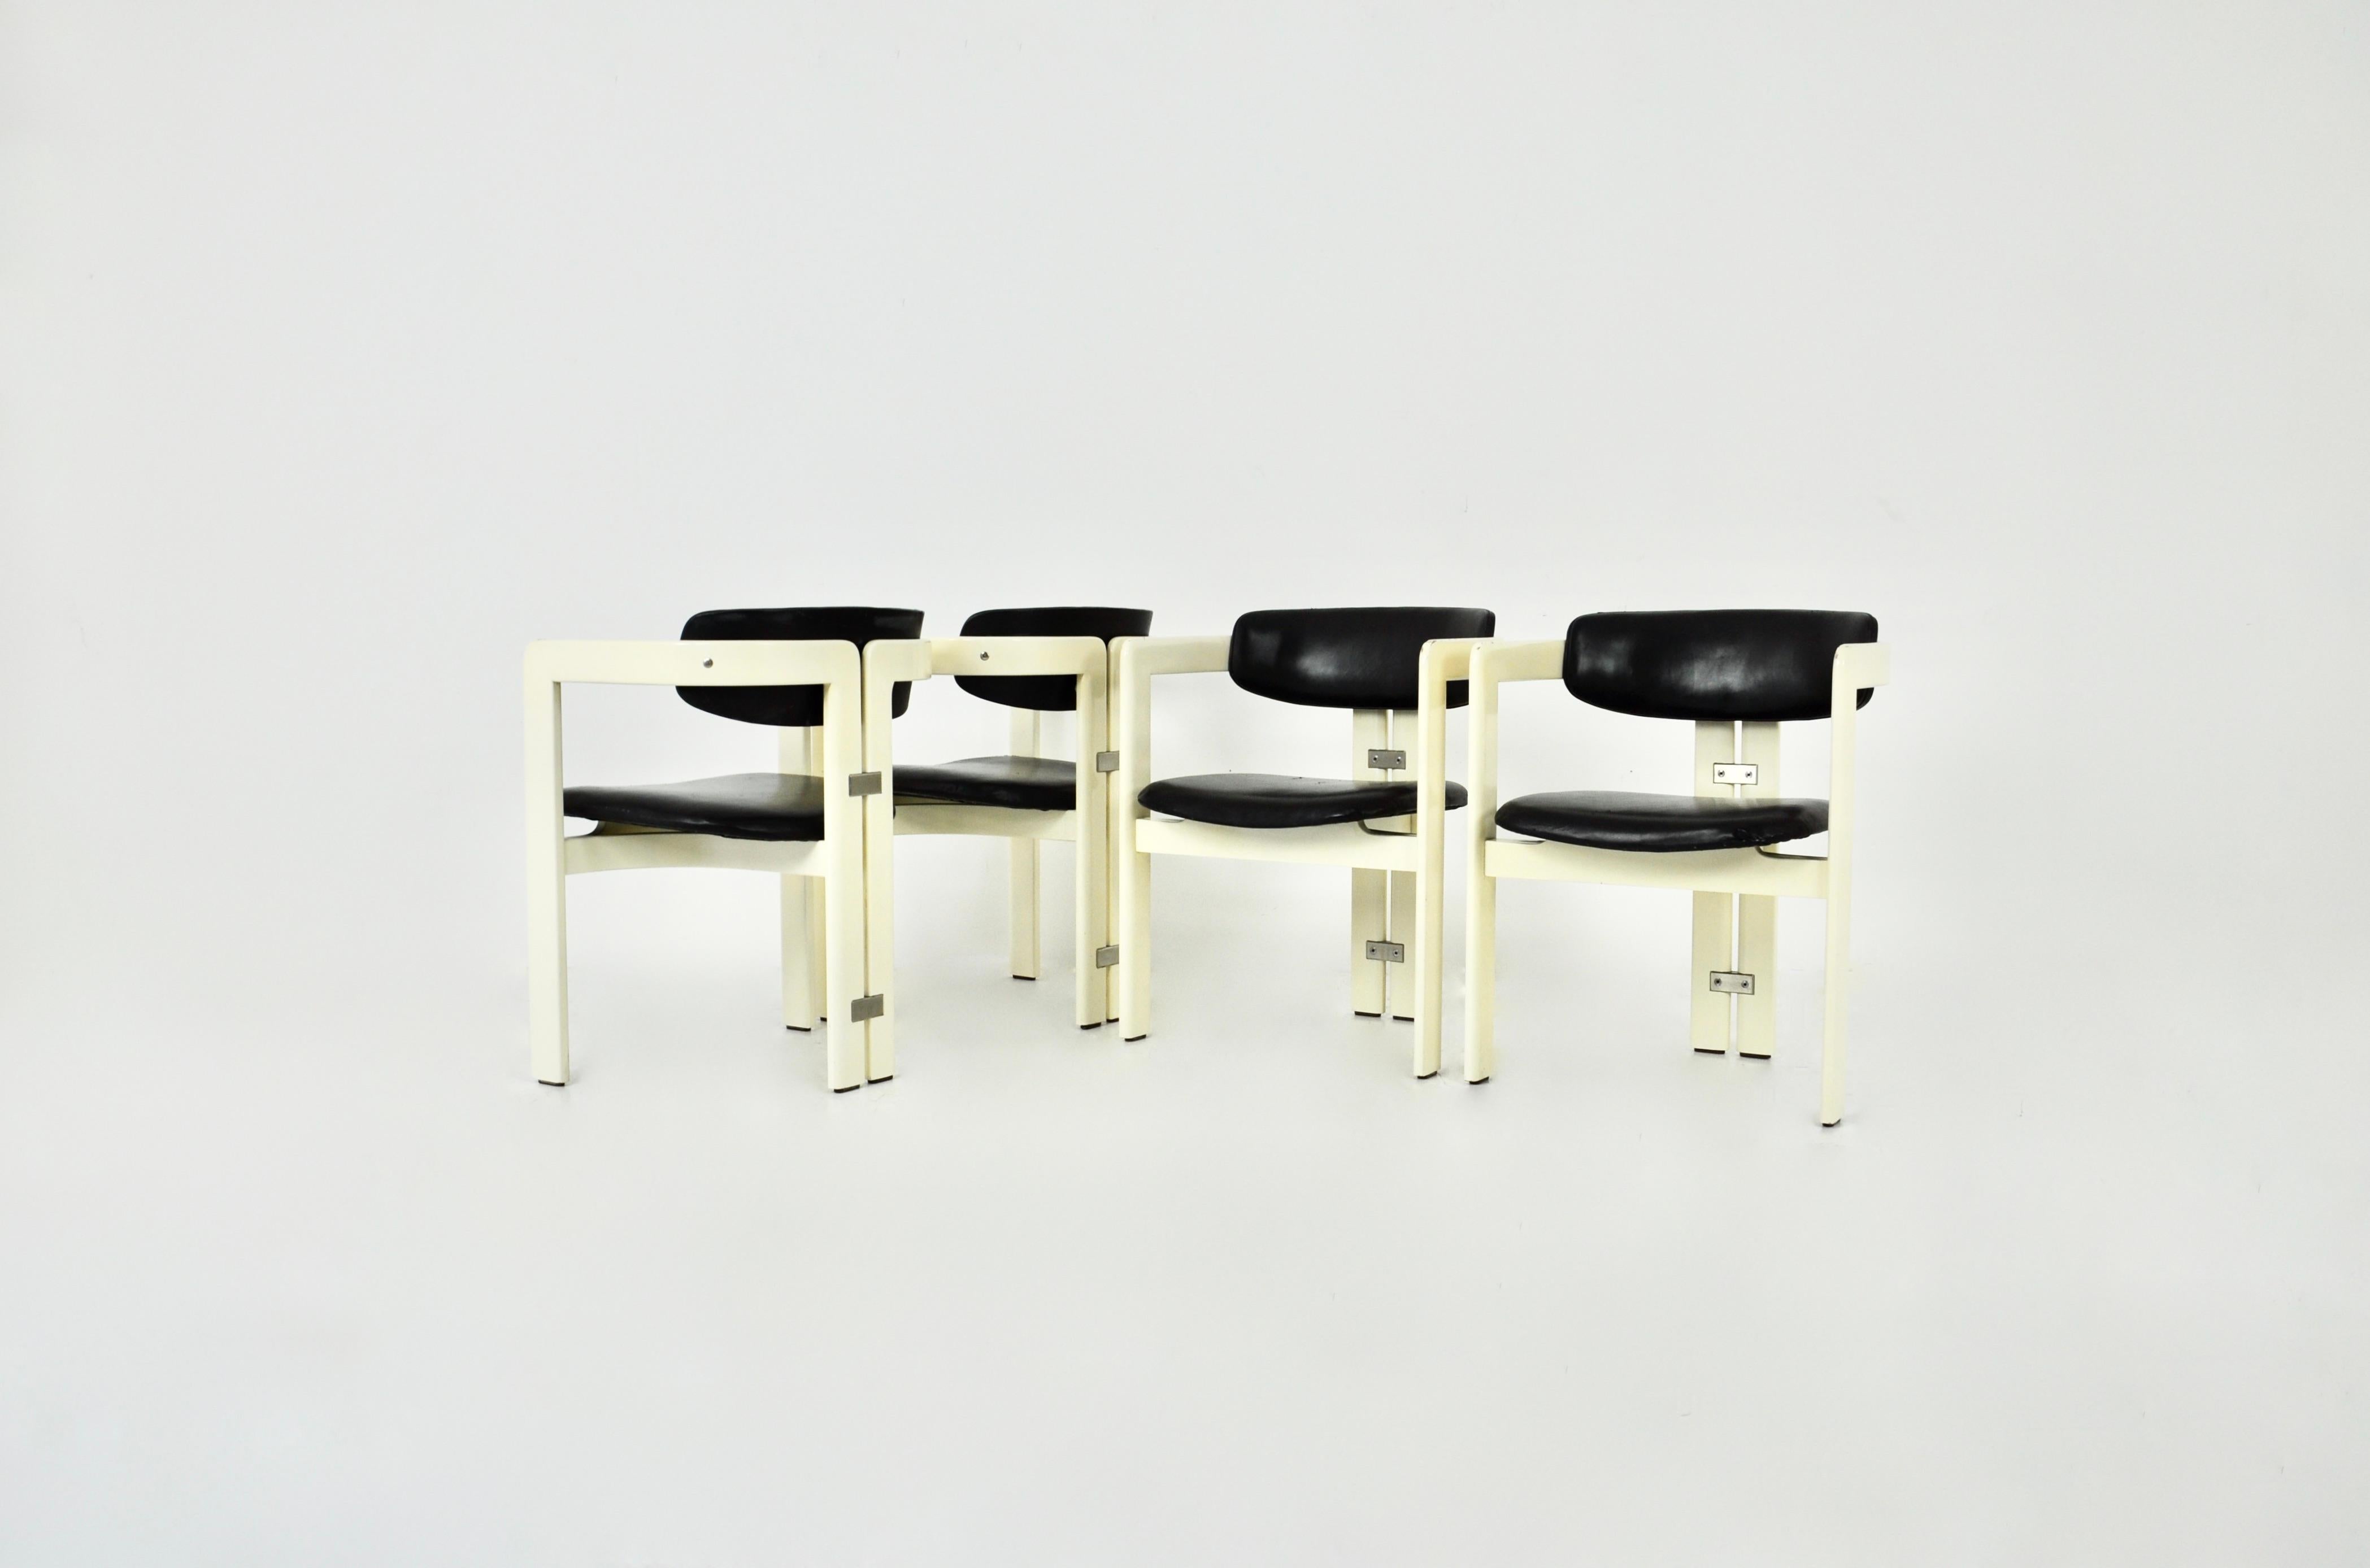 Set of 4 black and white wood and leather chairs by Augusto Savani for Pozzi. Seat height: 44 cm Wear due to time and age of the chairs.